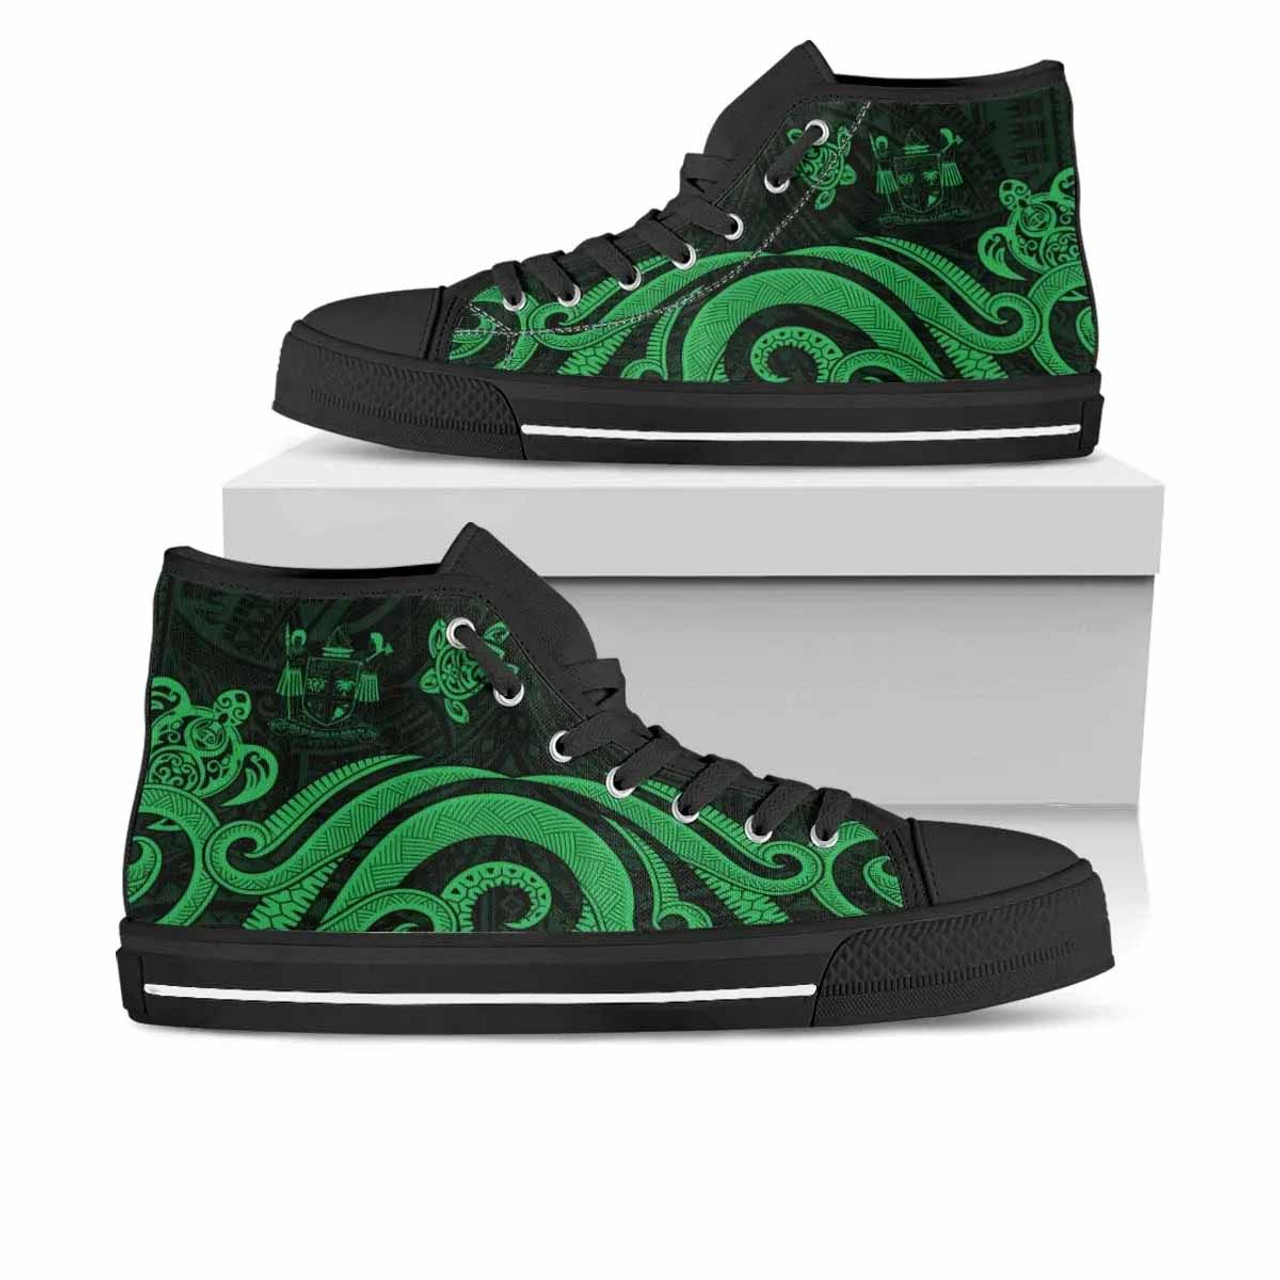 Fiji High Top Shoes - Green Tentacle Turtle Crest 1